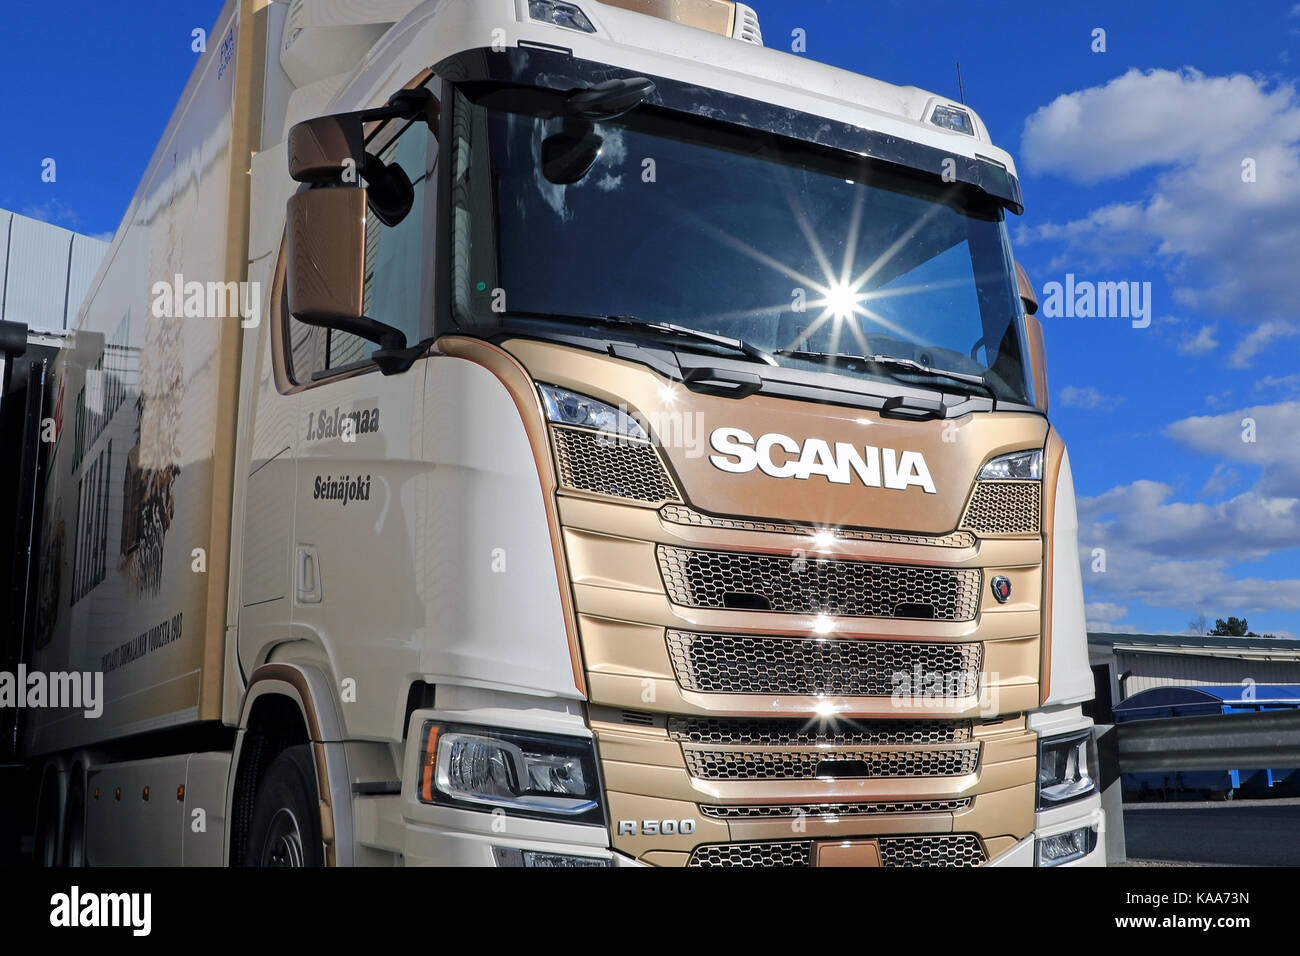 FORSSA, FINLAND - MAY 1, 2017: Detail of the stylish Next Generation Scania R500 of I Salomaa for transporting foodstuff at the loading zone of a ware Stock Photo